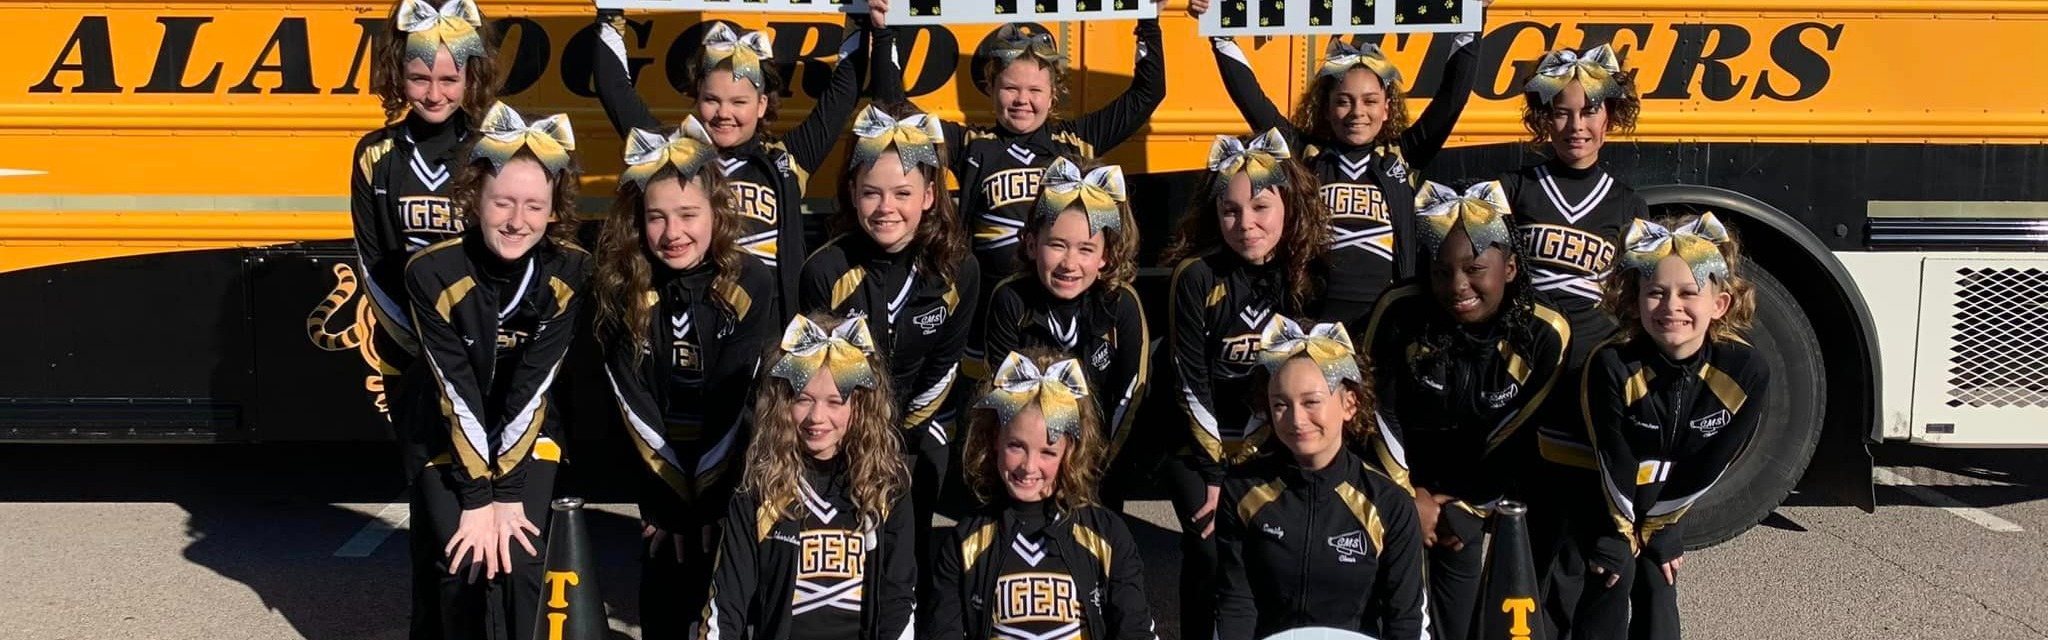 Cheerleaders in front of a bus